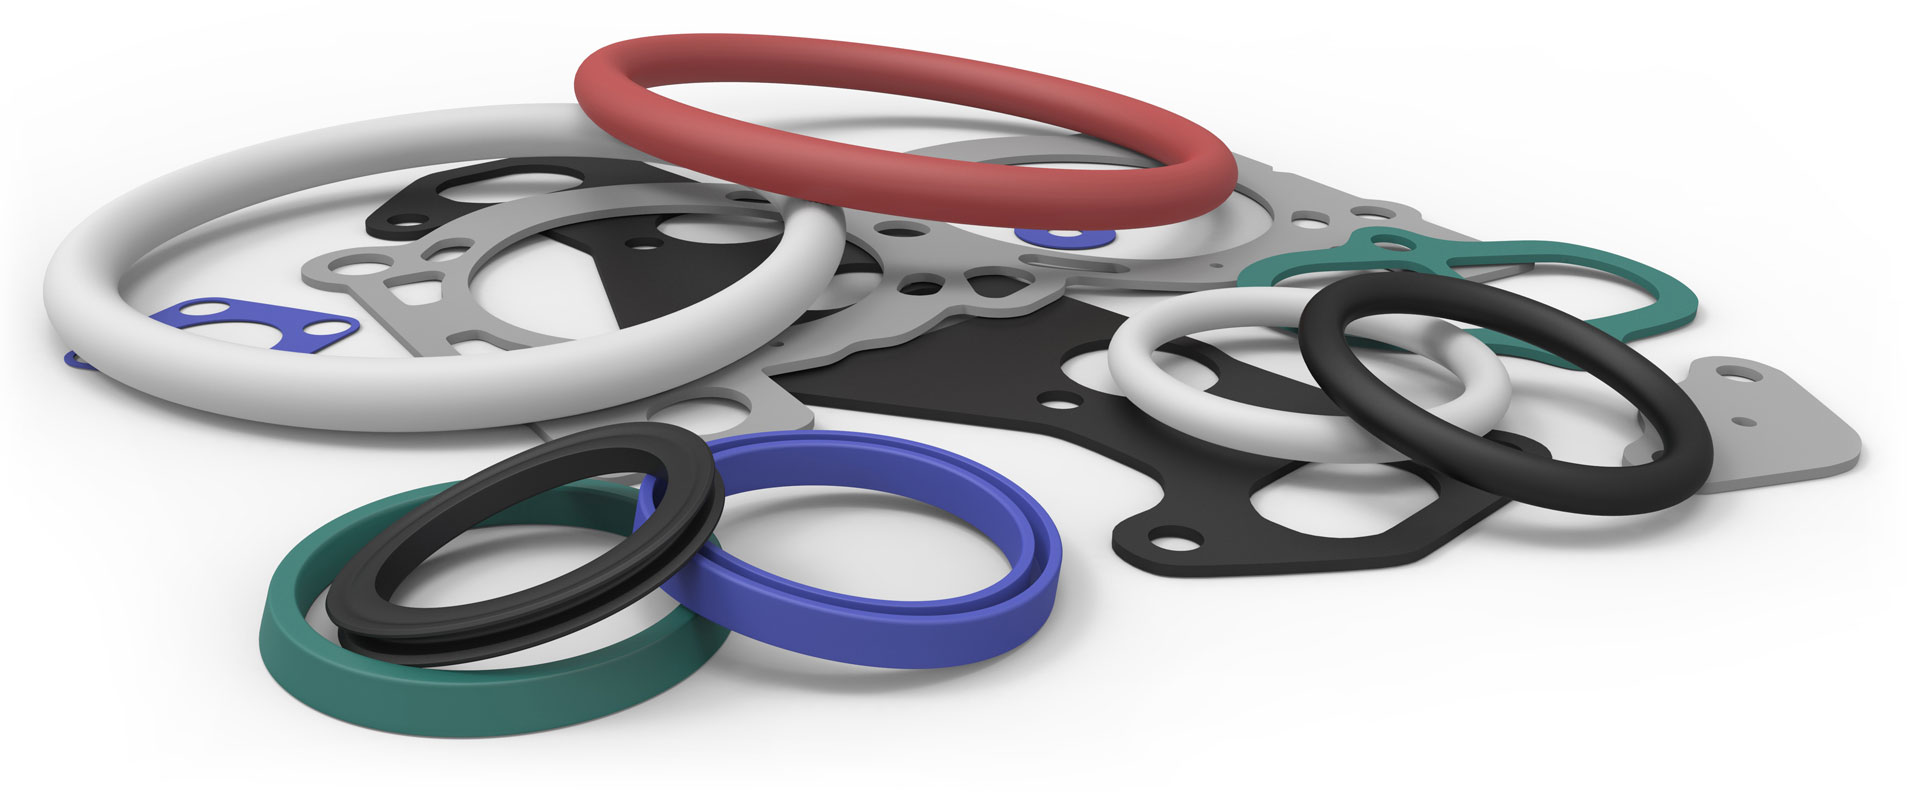 Rubber Gaskets and Seals for Comdaco Rubber Manufacturing Services in Kansas City Missouri